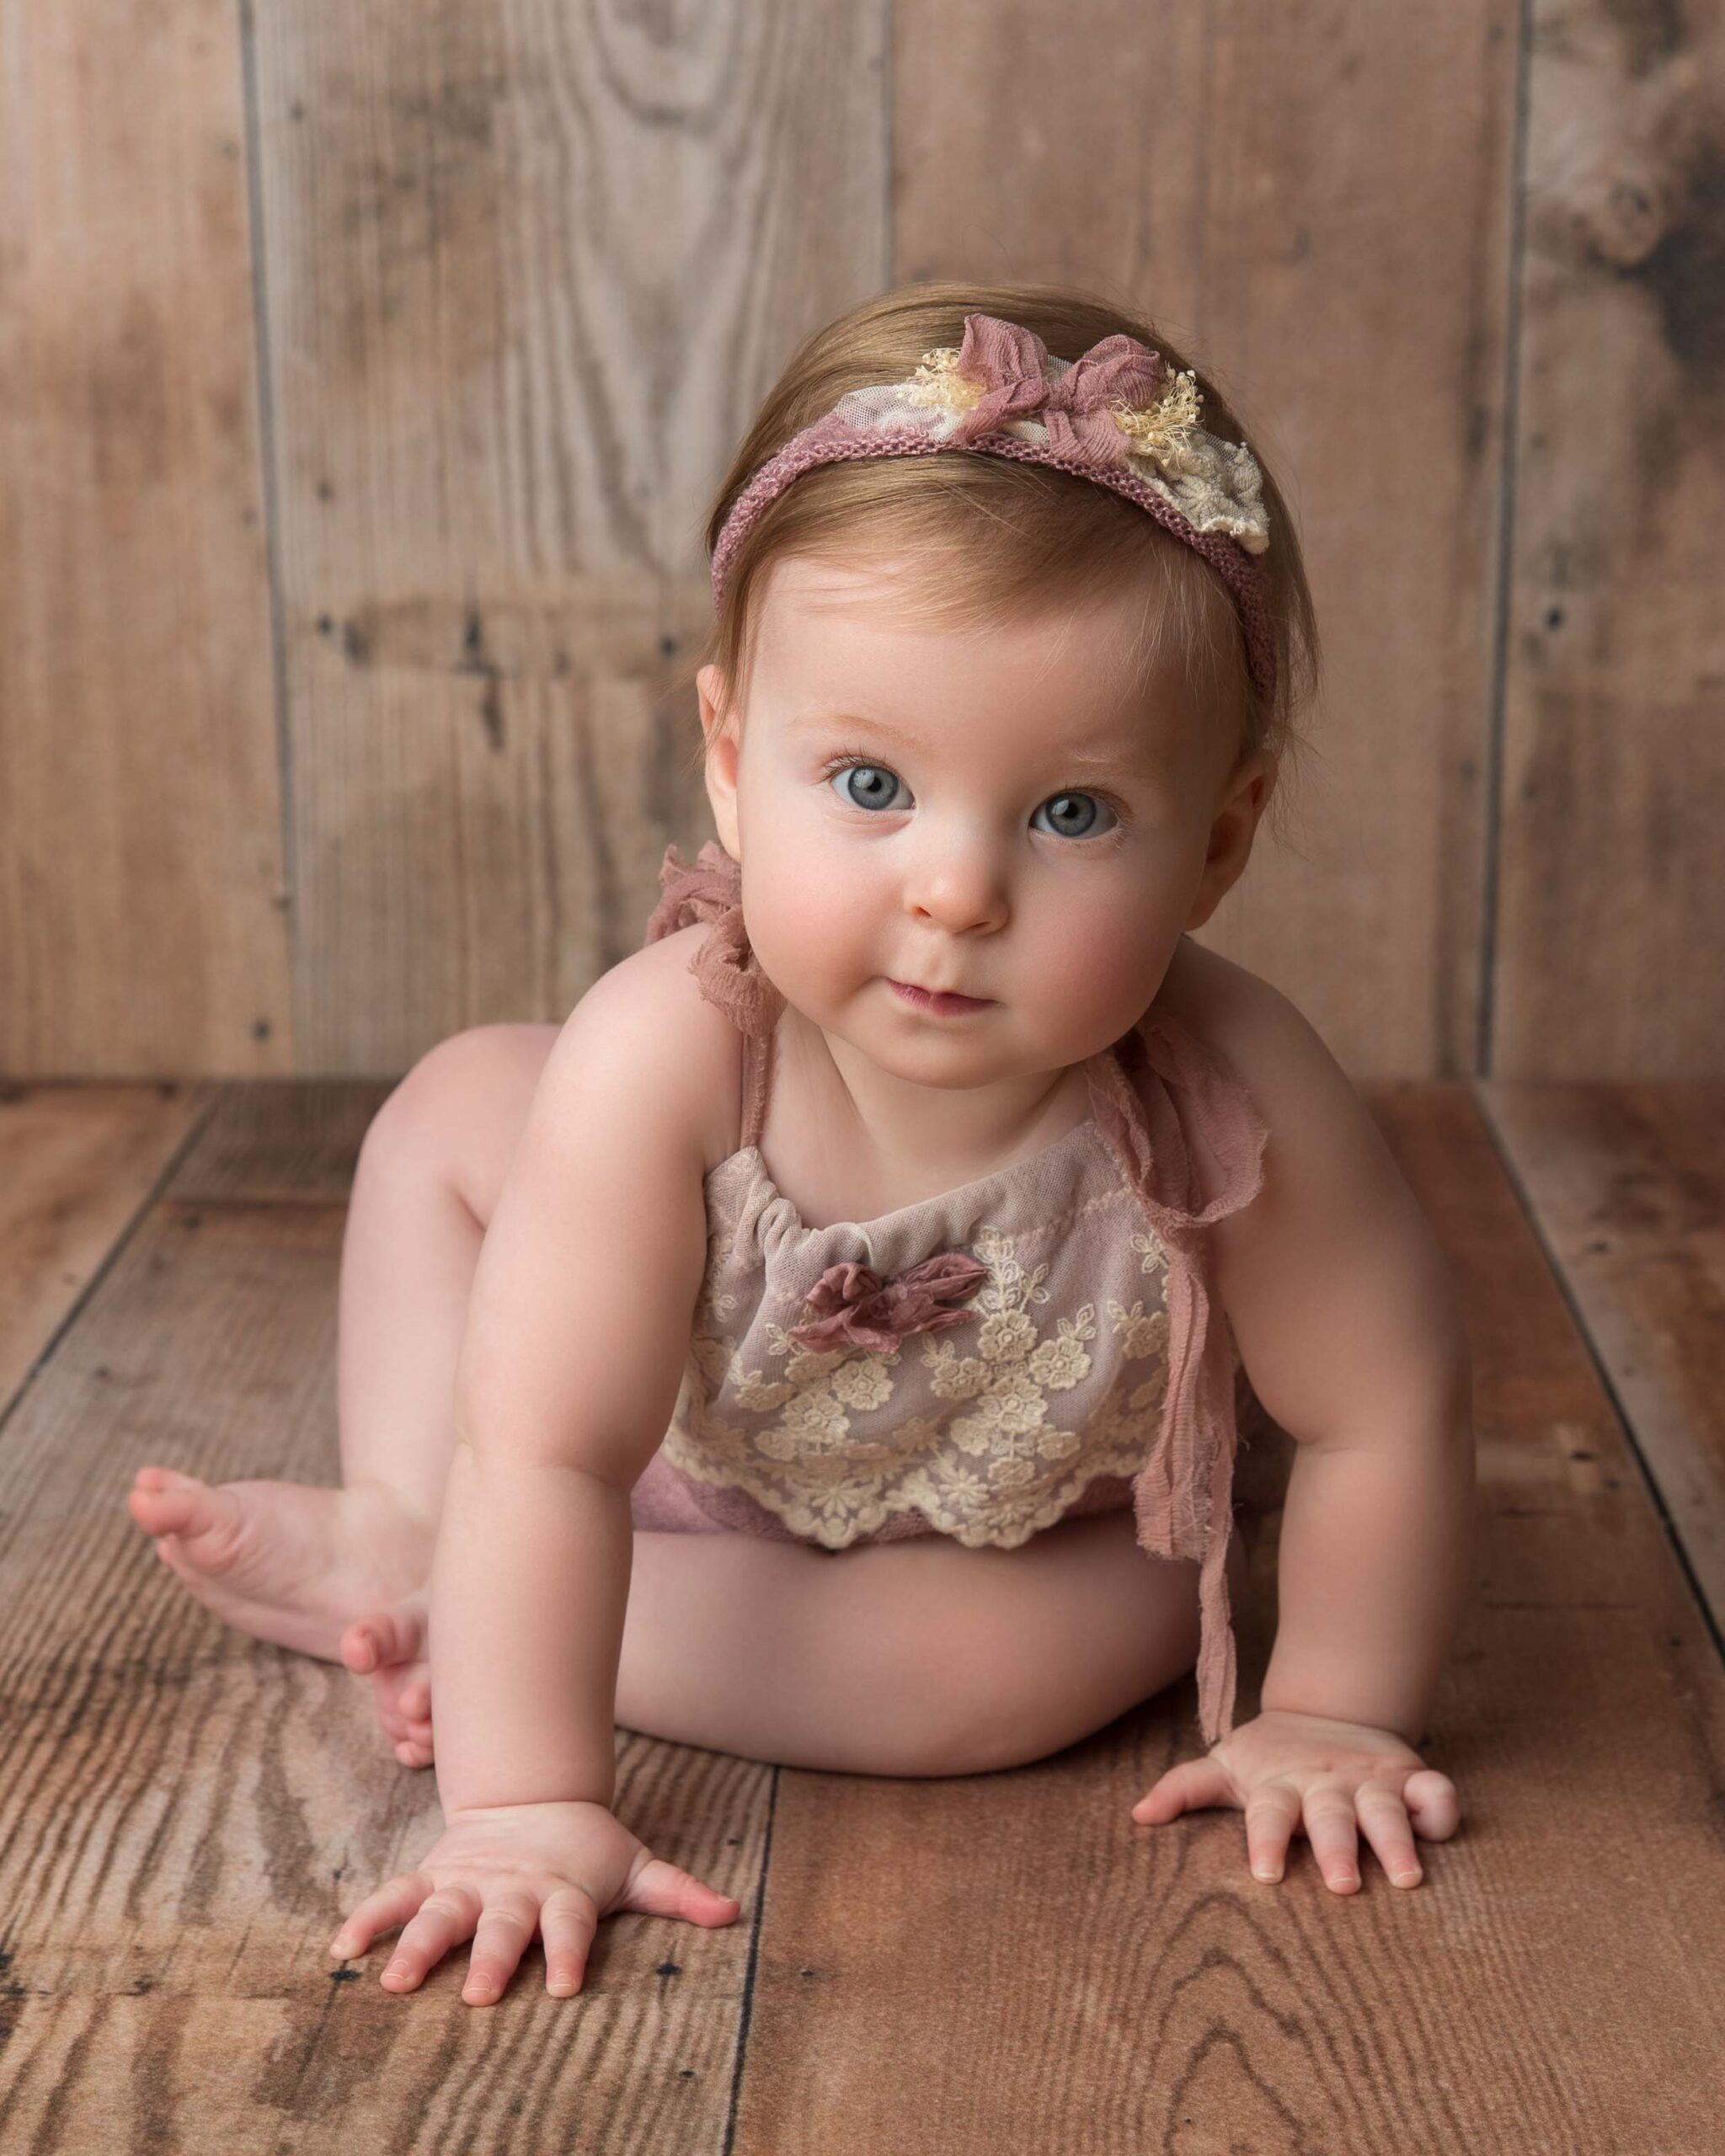 baby girl sitting on wood background leaning forward on her knees